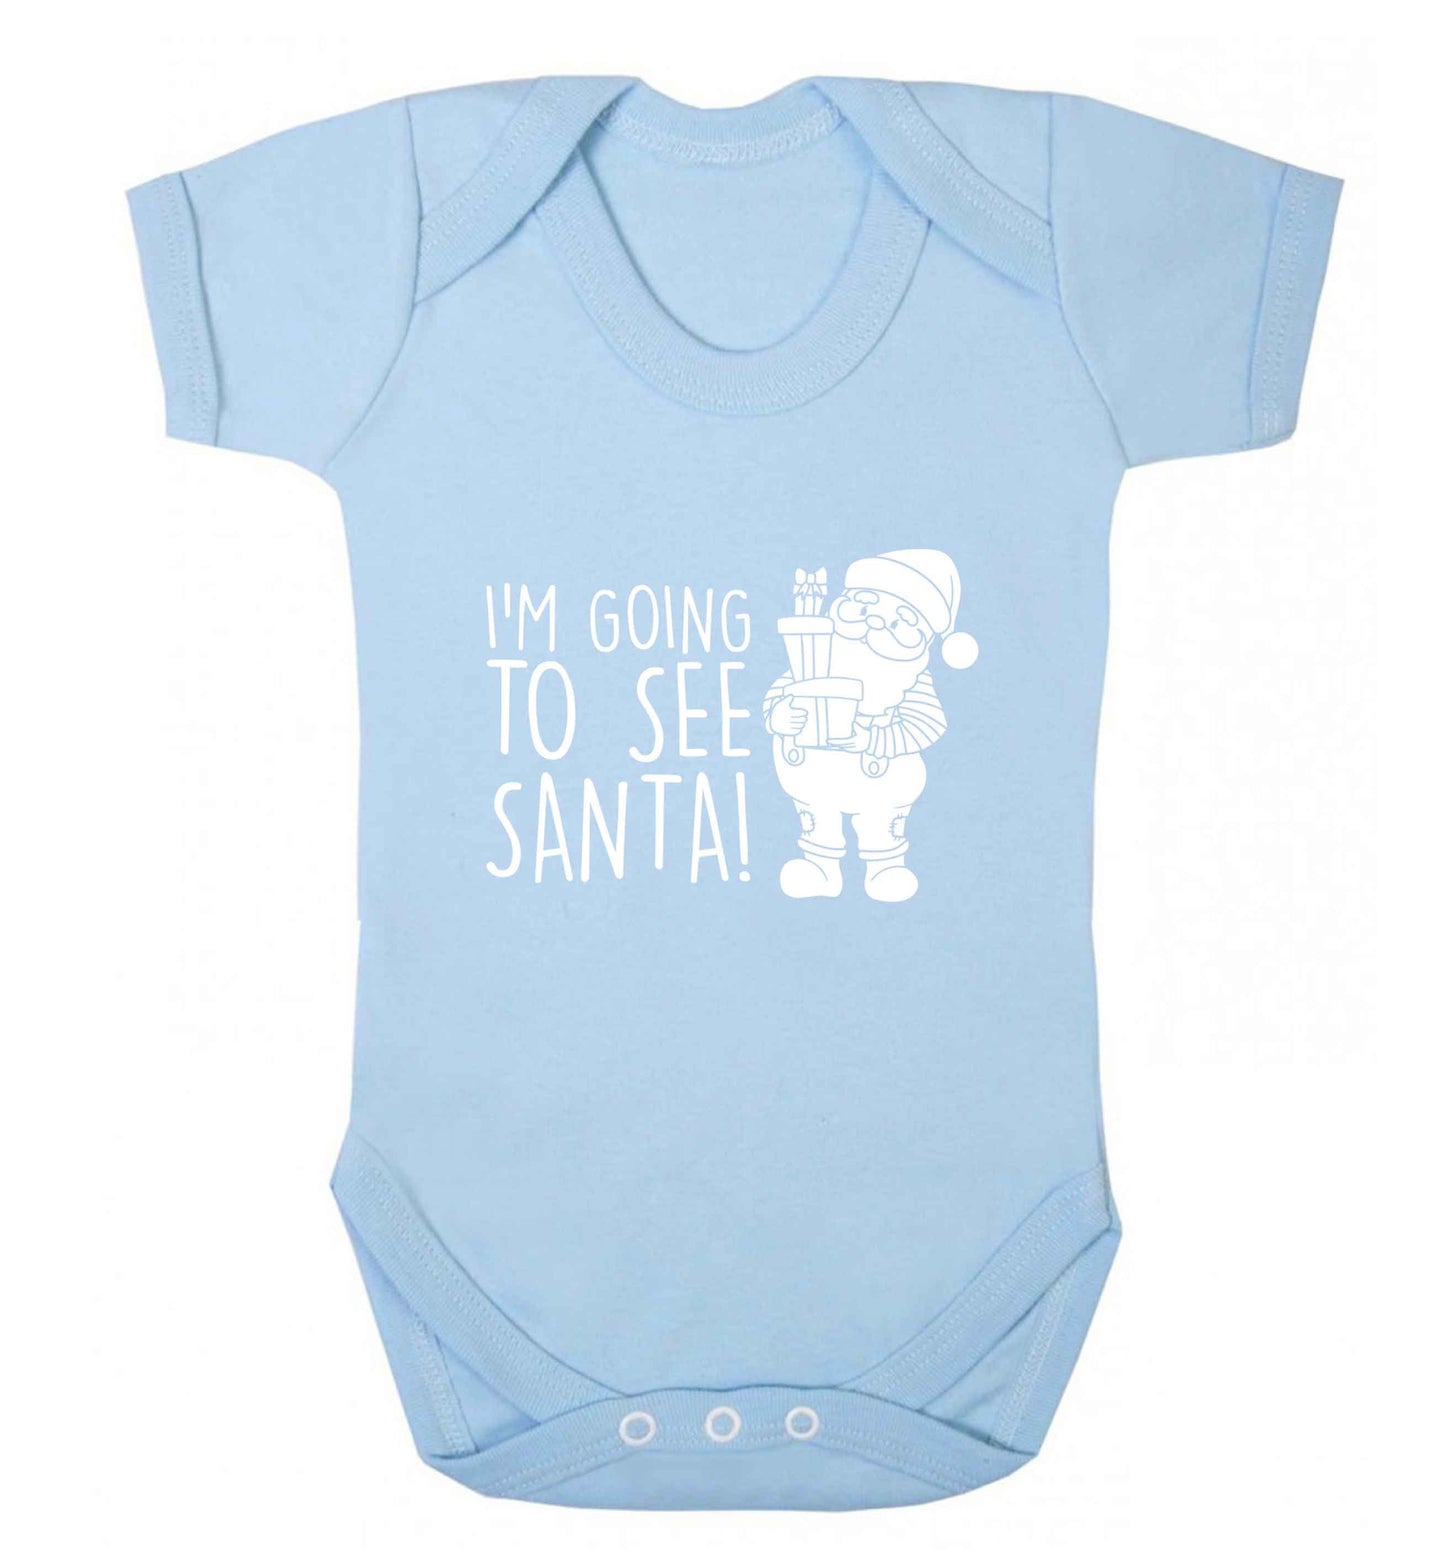 Merry Christmas baby vest pale blue 18-24 months